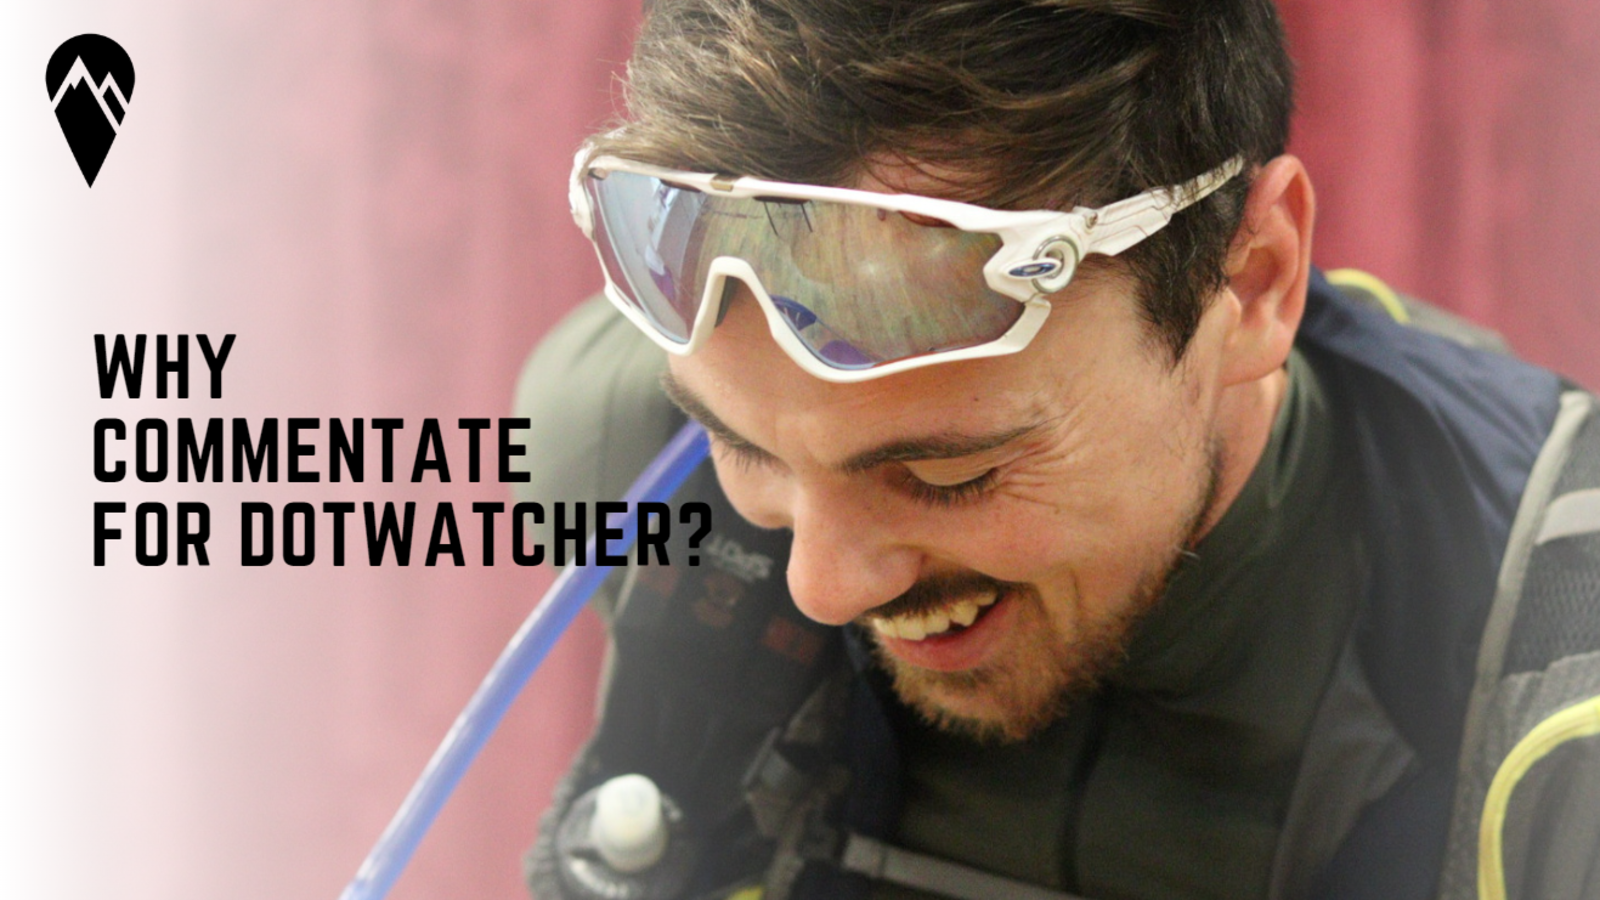 Why Commentate for DotWatcher?